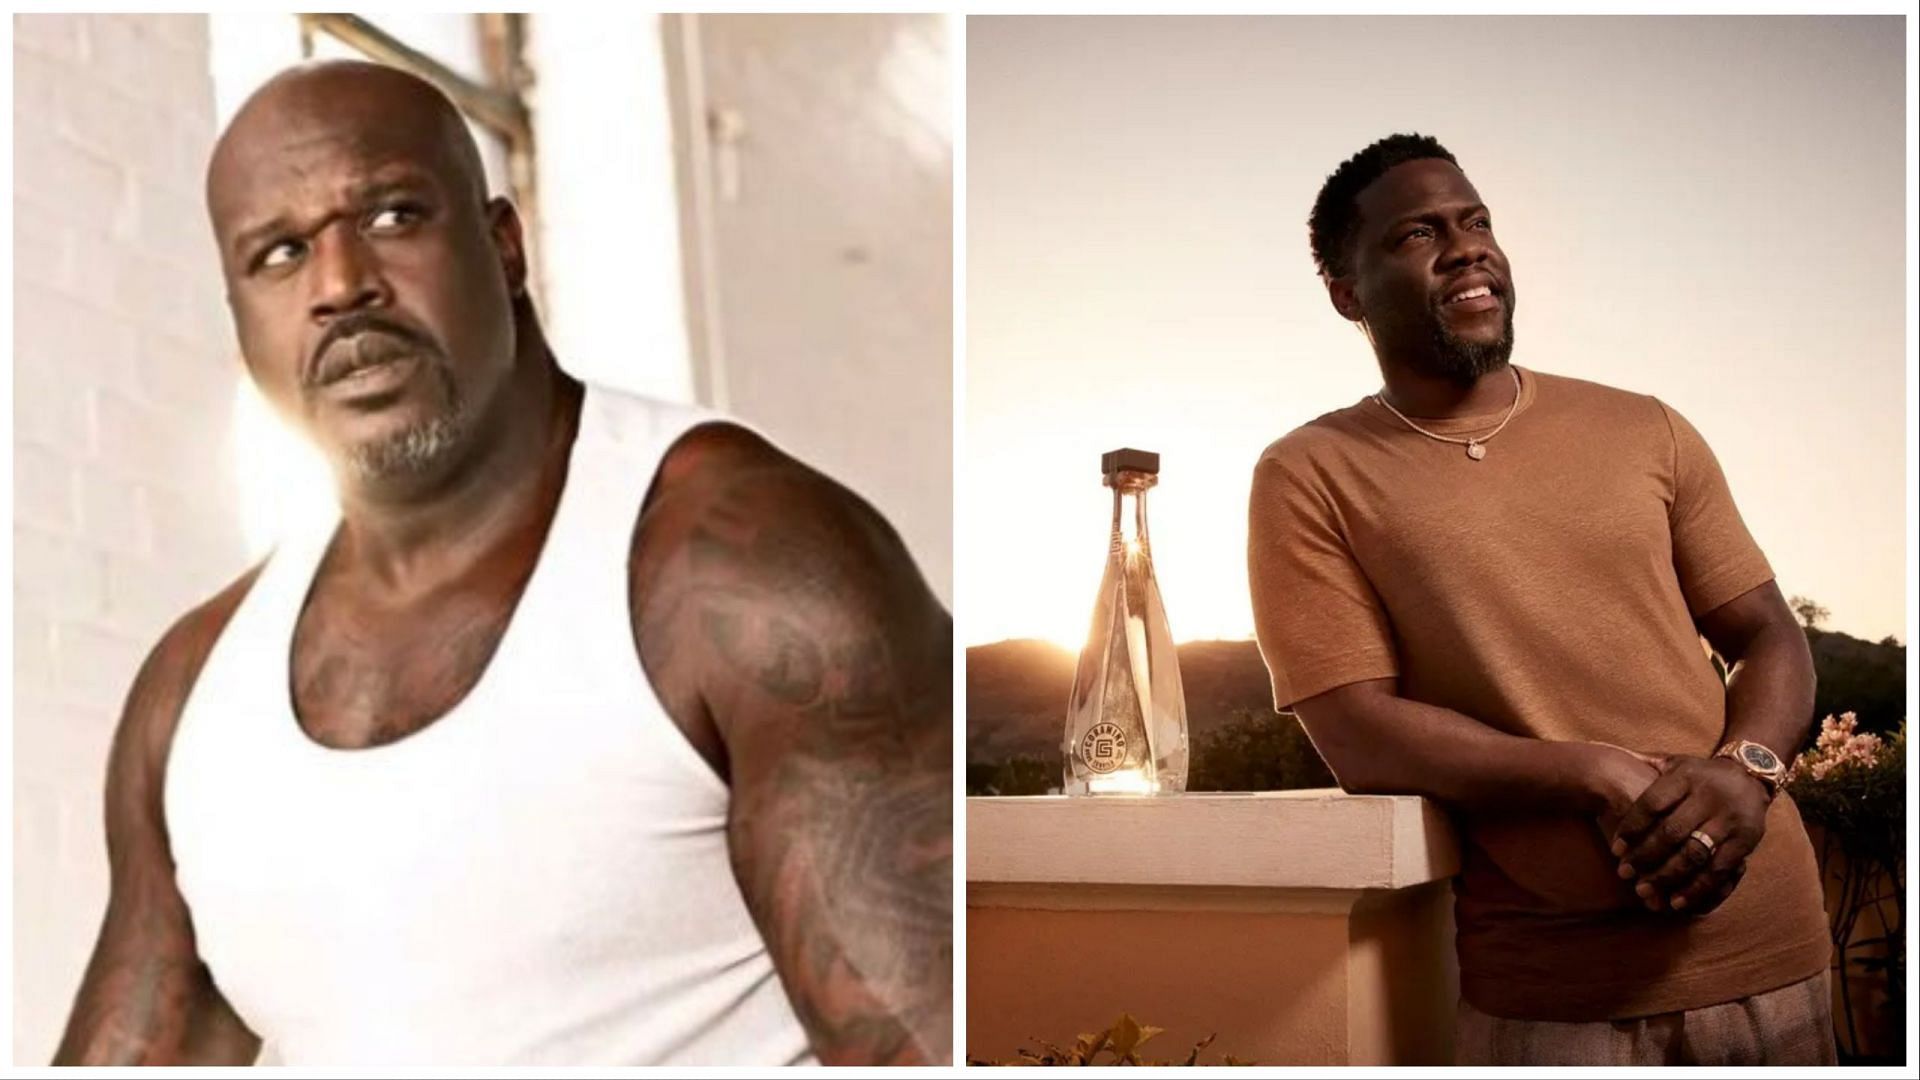 Kevin Hart once playfully smacked a shoe onto Shaquille O